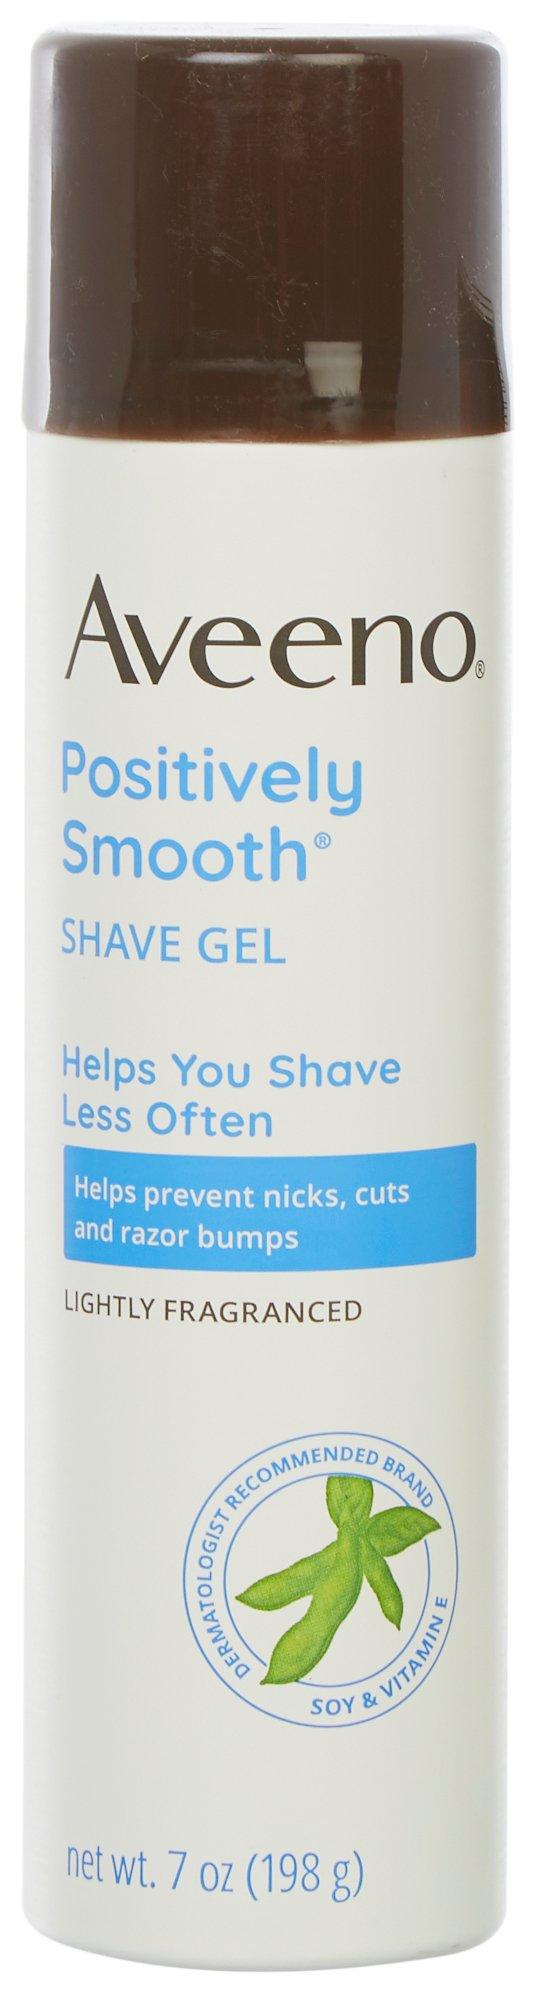 Aveeno Positively Smooth Shave Gel 7 oz.